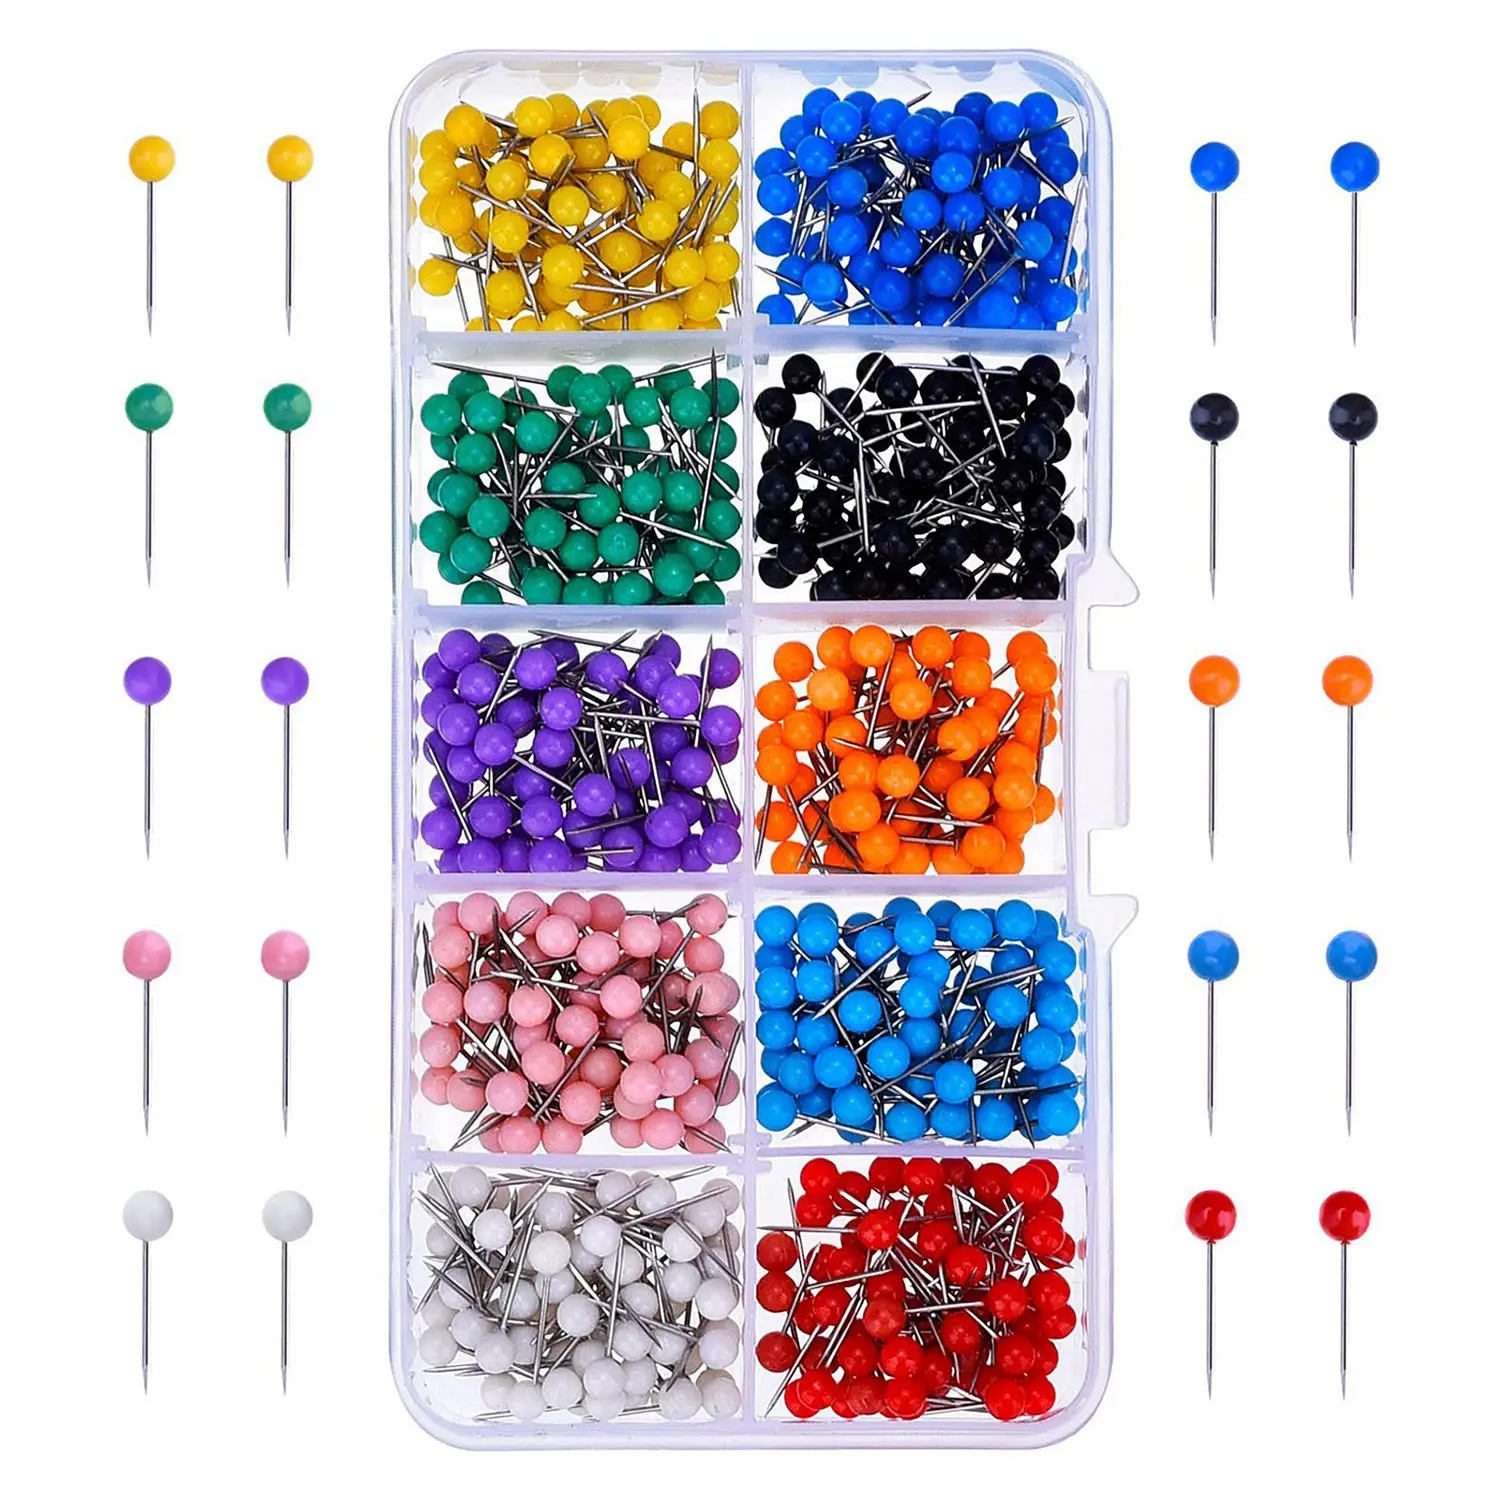 SUPVOX Map Tack Push Pins Colorful Plastic Location Pins with Steel Point Clothing Sewing Needles for Home Office School Fishing Craft 